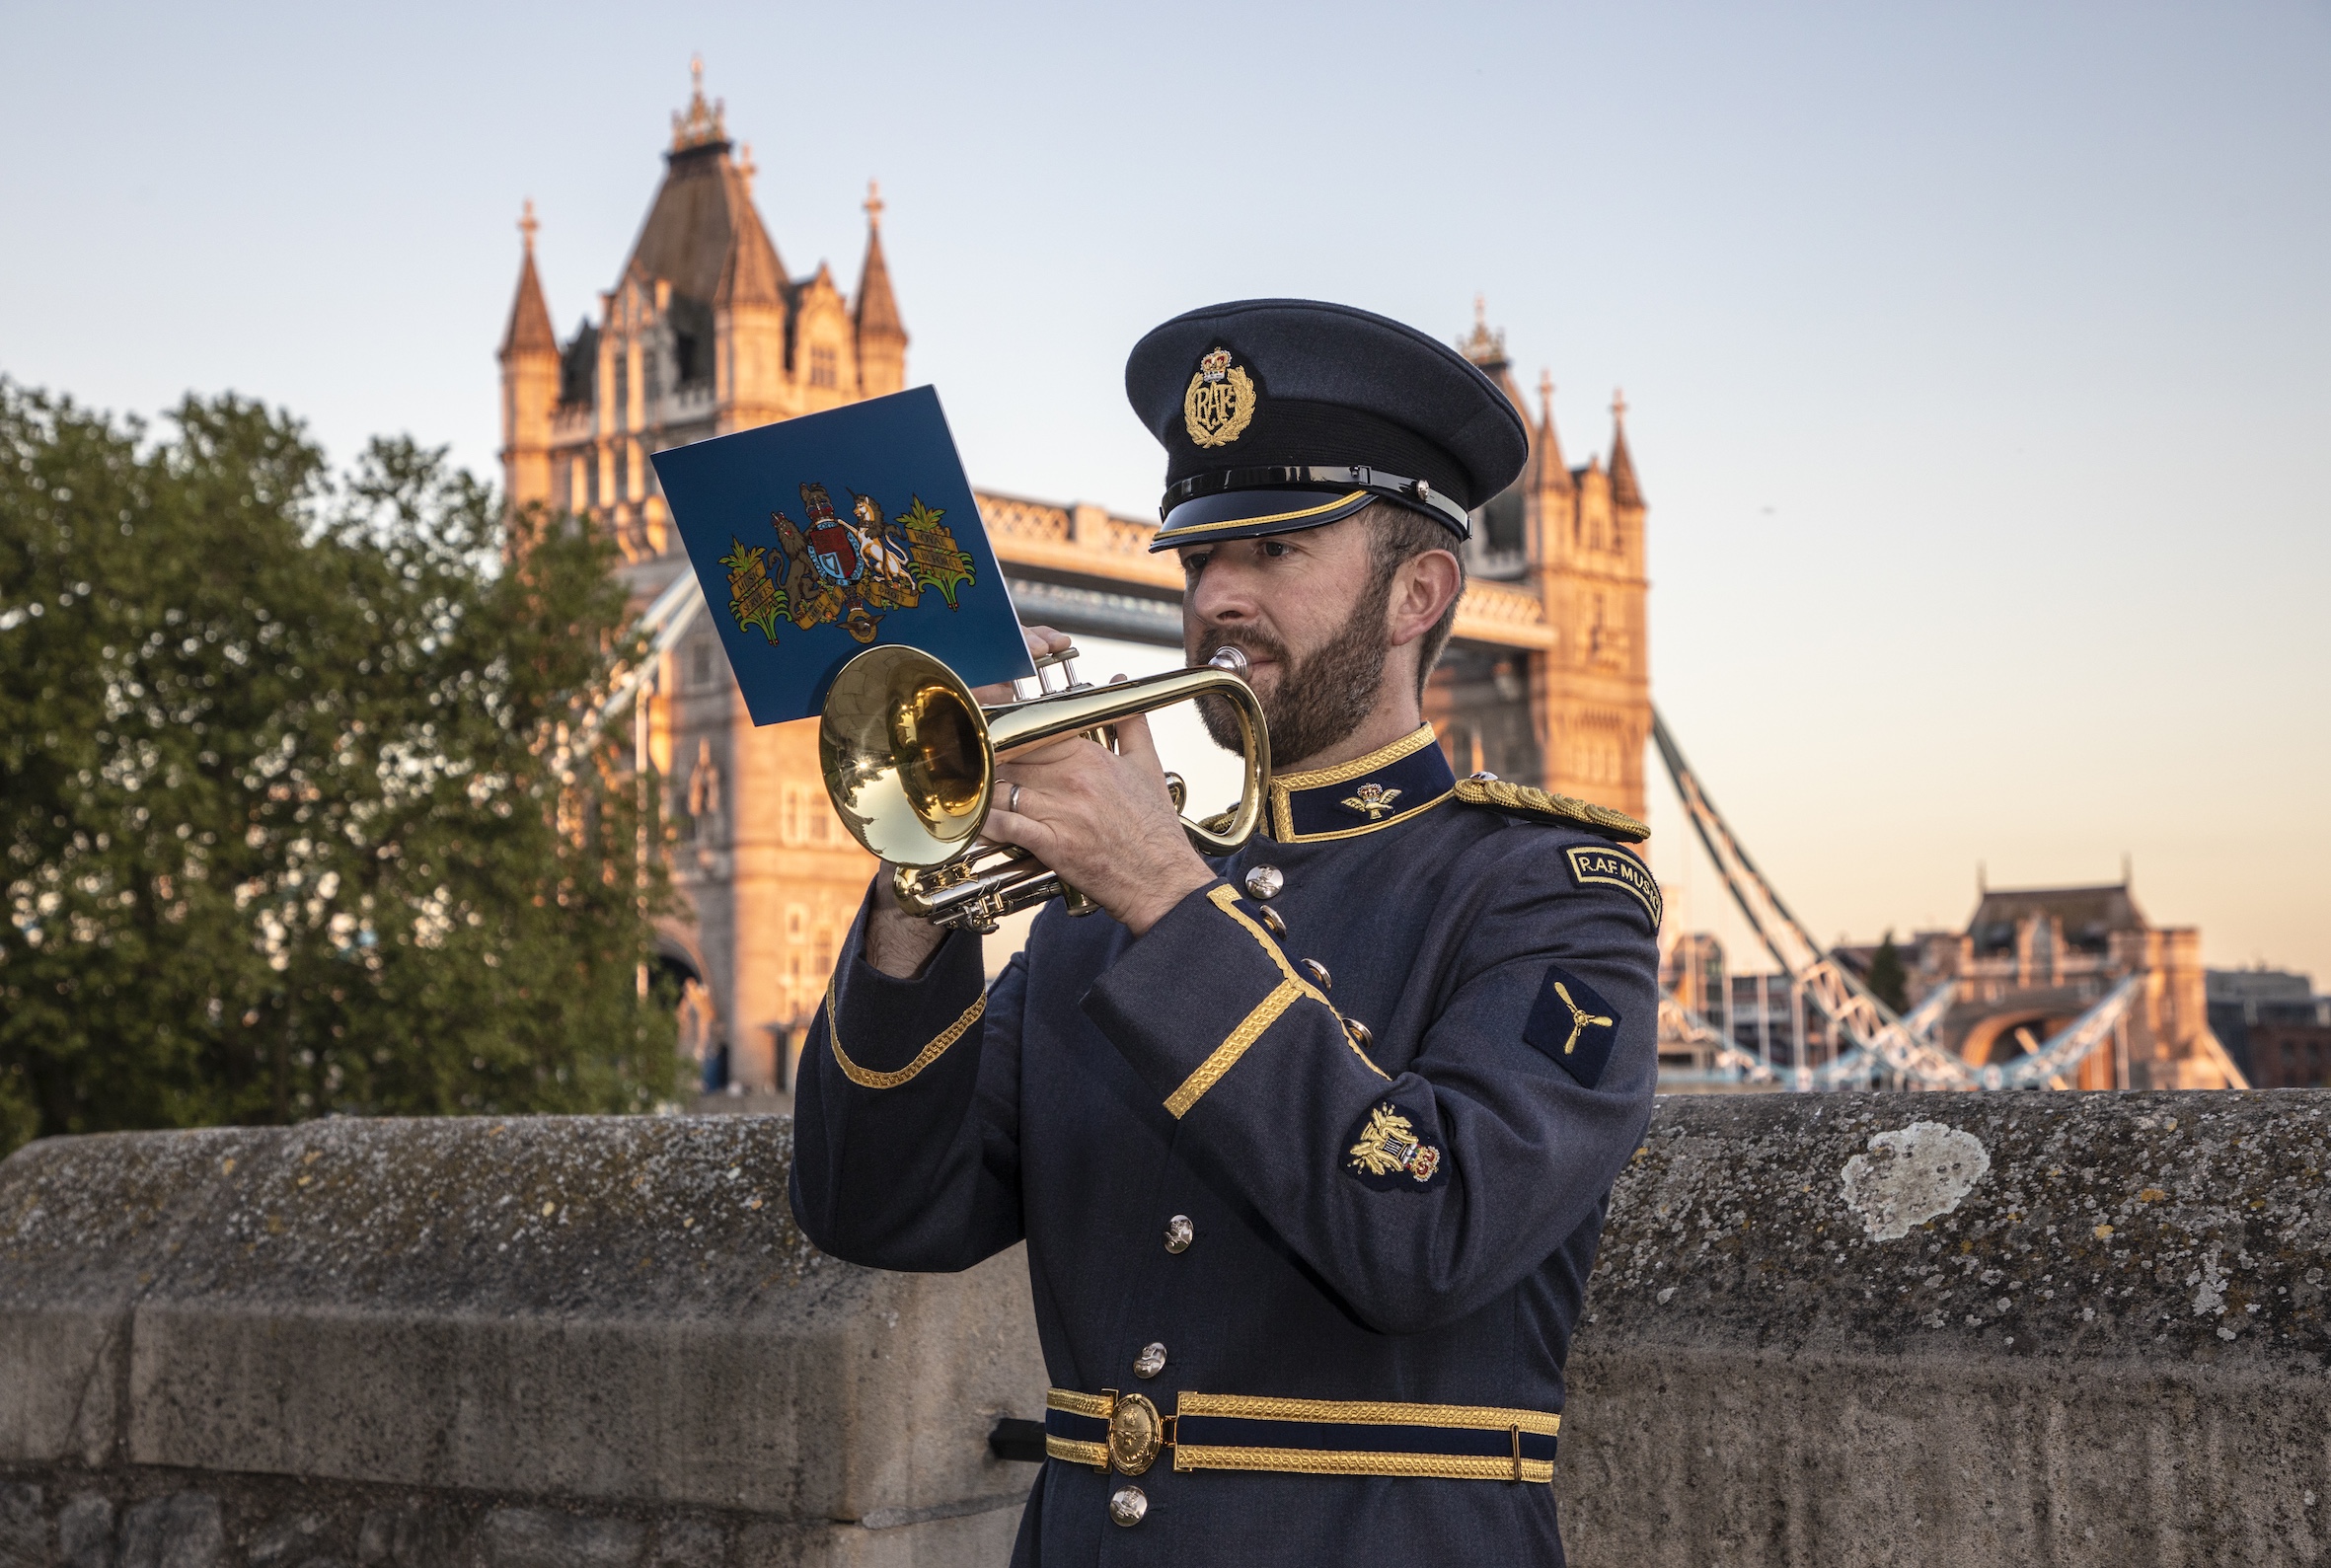 SAC Thomas playing his instrument in front of Tower Bridge